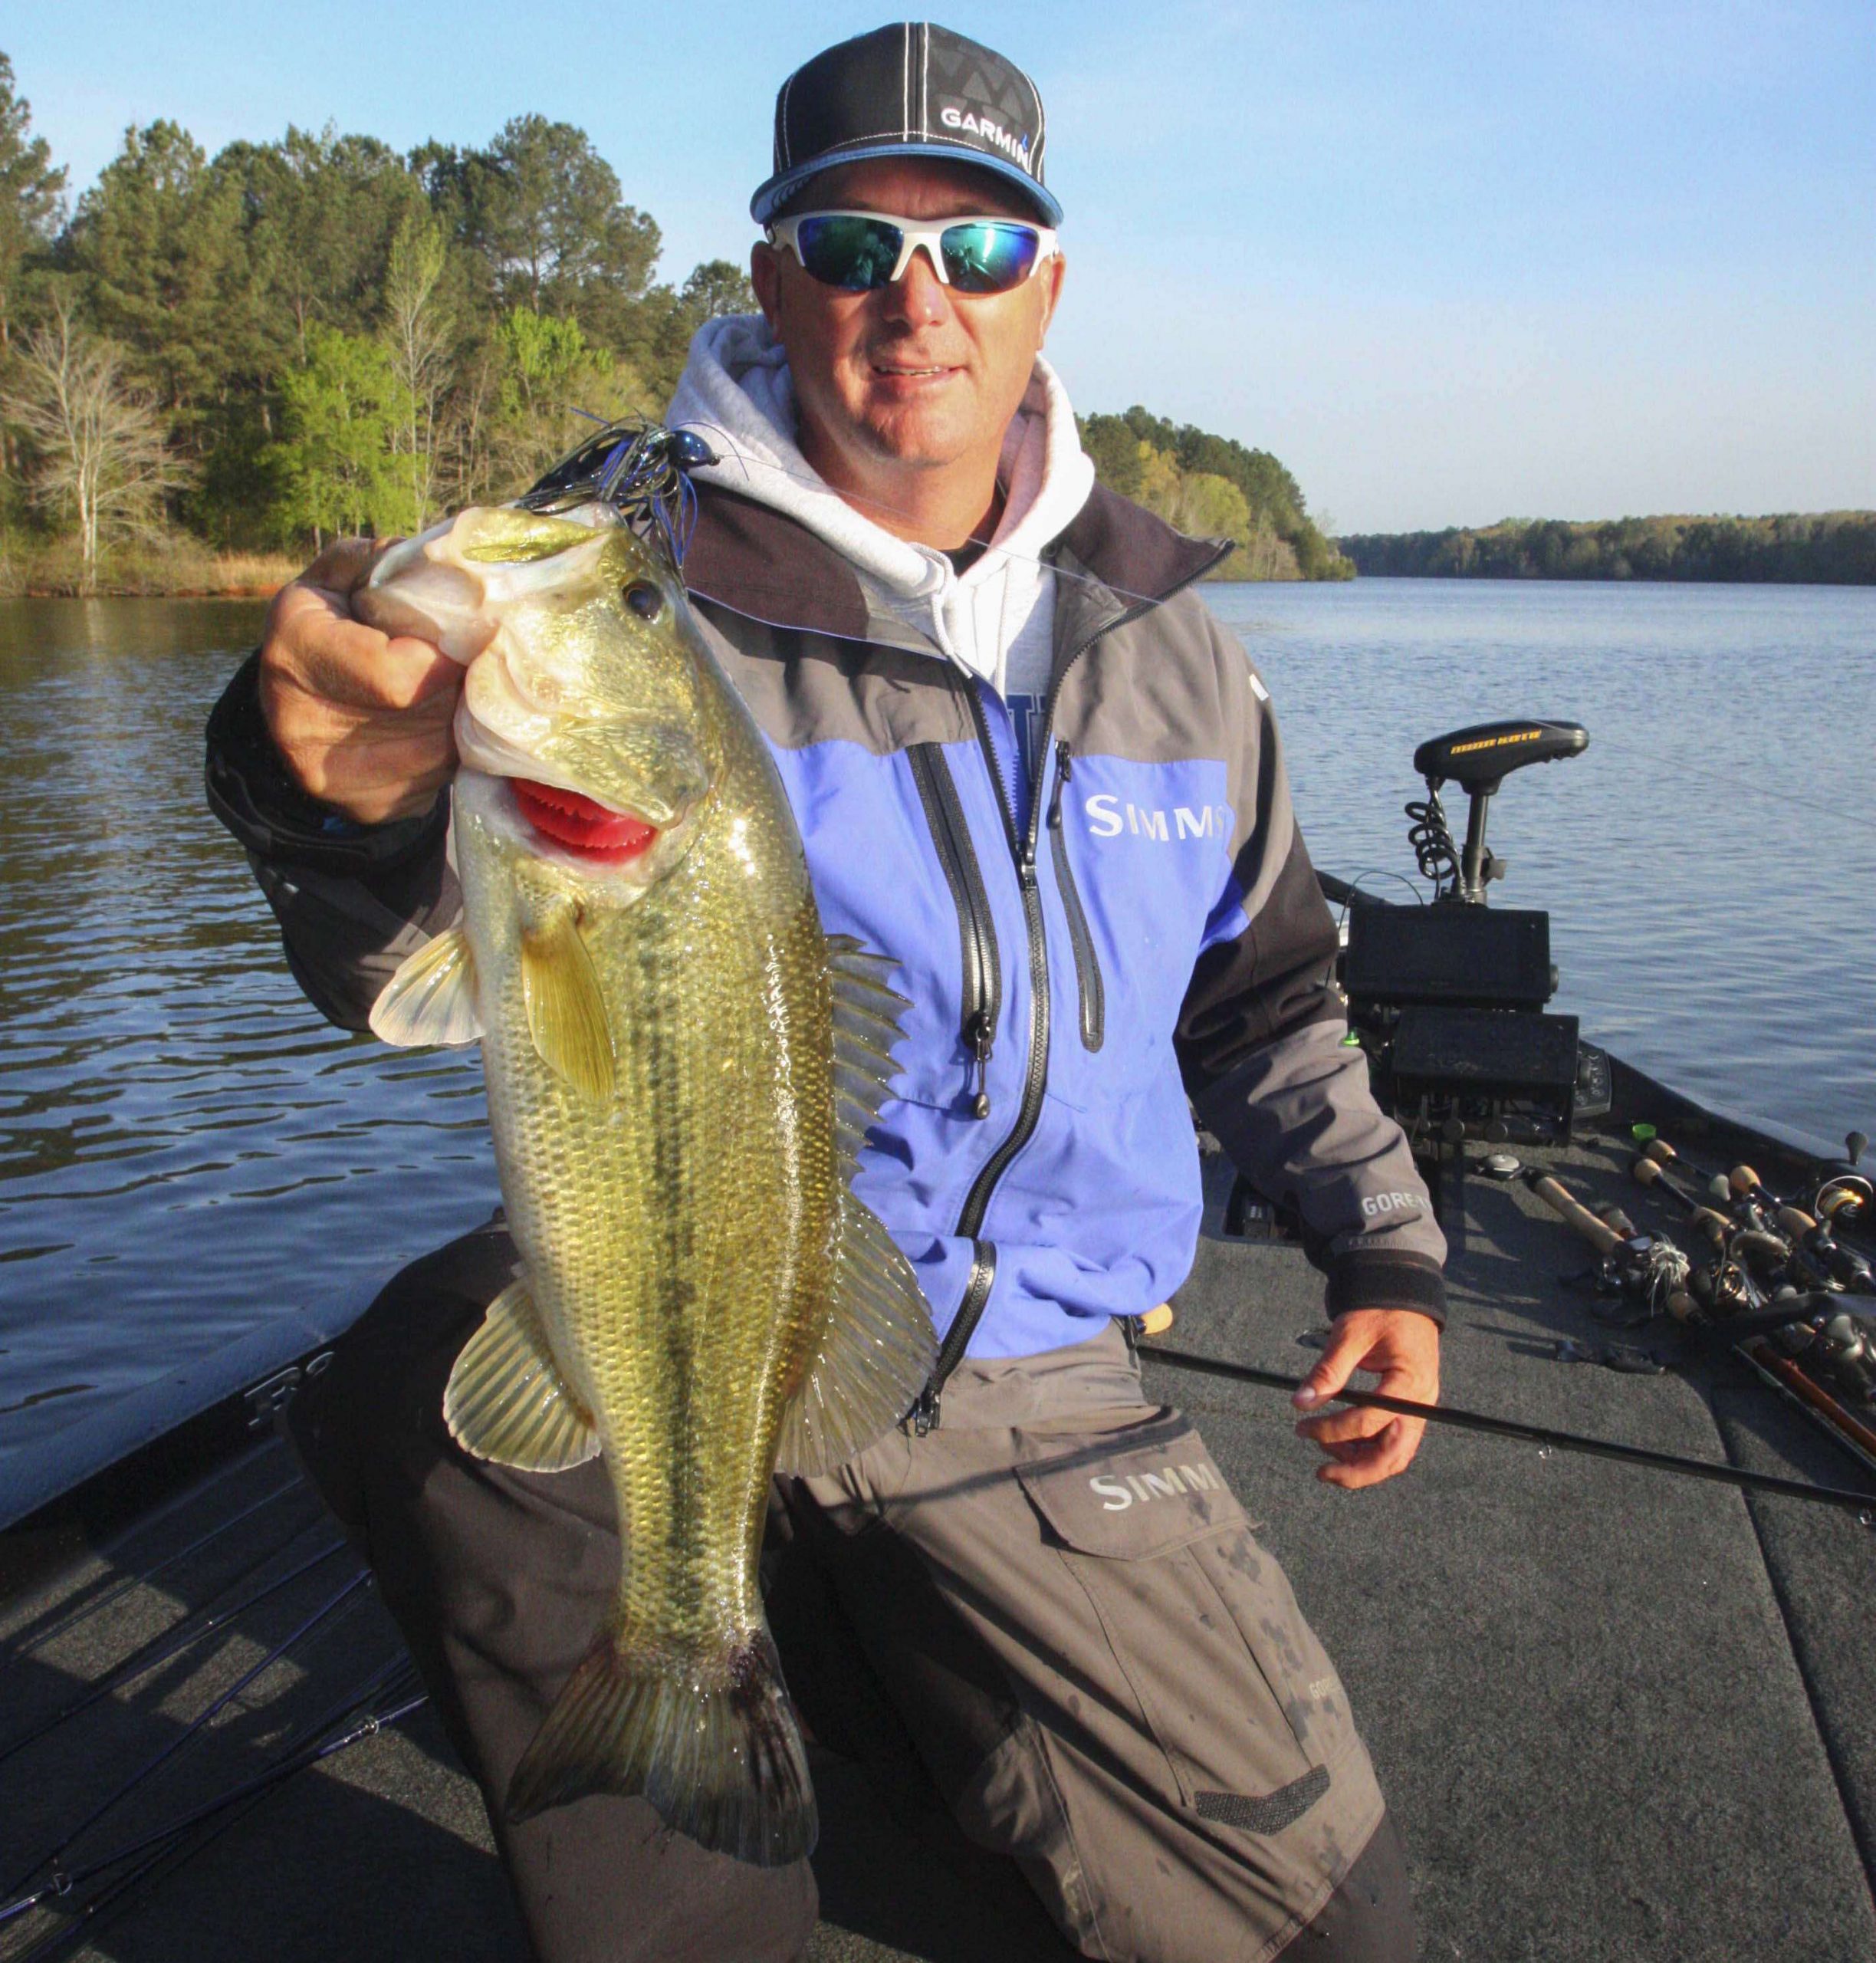 <b>7:41 a.m.</b> Grigsby flips the jig to a submerged branch on a shallow point, swings back his rod and launches his first keeper bass of the day, 3 pounds, 11 ounces, into his boat. âAll right! I hopped the jig over that branch and saw the fish swim up and eat it! This is a big male, and he wasnât on a nest. They may be staging out here around isolated pieces of cover.â<br>
<p>
<b>6 HOURS LEFT</b><br>
<b>7:45 a.m.</b> Grigsby moves to the back of a shallow pocket to flip the jig beneath overhanging bushes. No sign of spawning beds here, either.<br>
<b>7:52 a.m.</b> Grigsby is wind-drifting uplake while chunking the spinnerbait.<br>
<b>7:57 a.m.</b> Grigsby pitches the jig to a shallow stickup, swings and misses. âI saw that fish flash on it; looked like a 2-pounder. He took my trailer.â